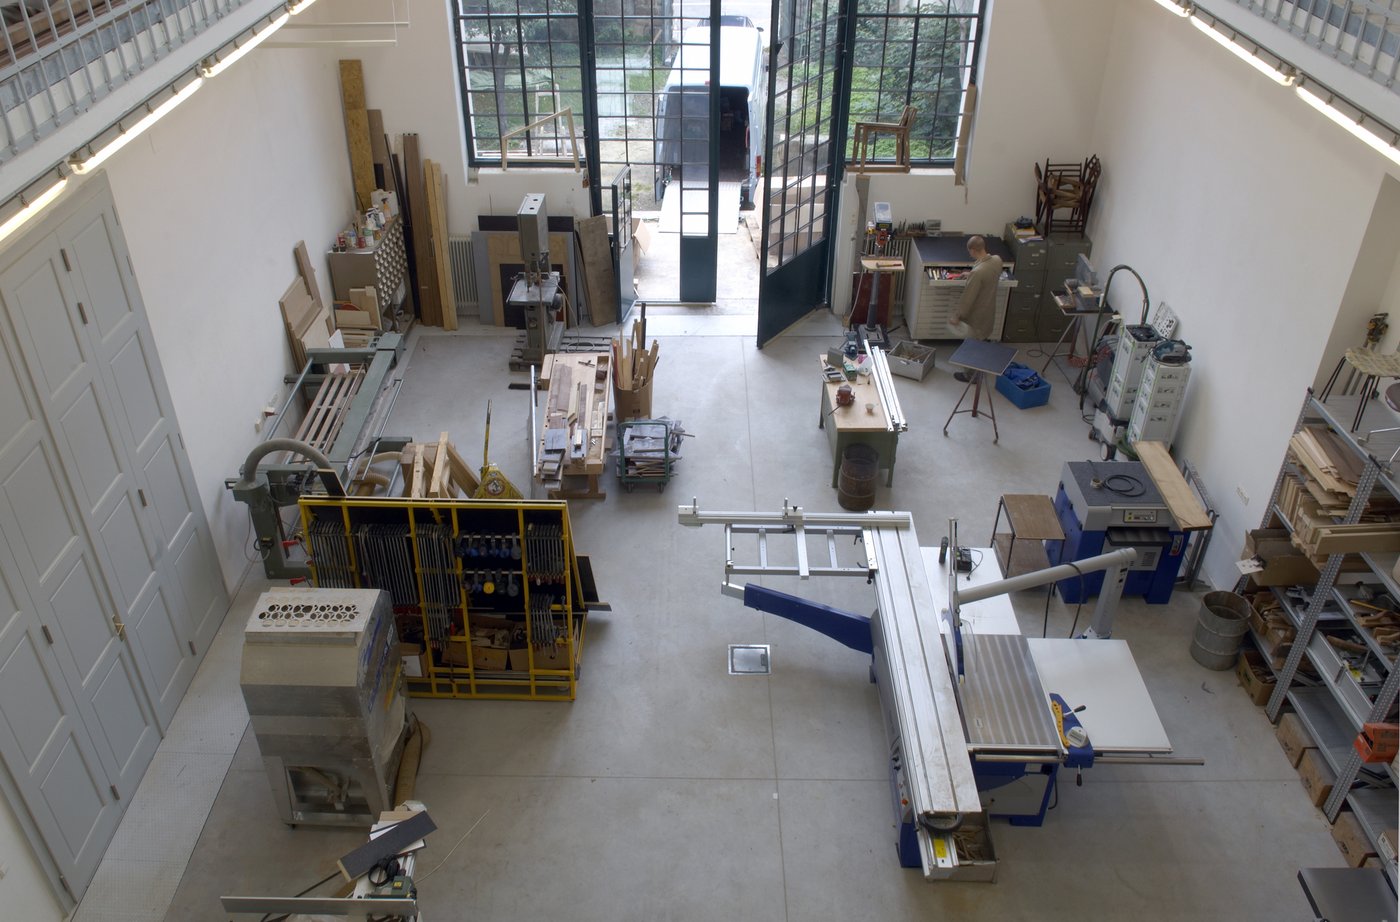 View into the workshop from above, you can see many tools for woodworking, shelves and wooden planks. In the background, the gate opens to the garden, where there is a van with an open loading area.